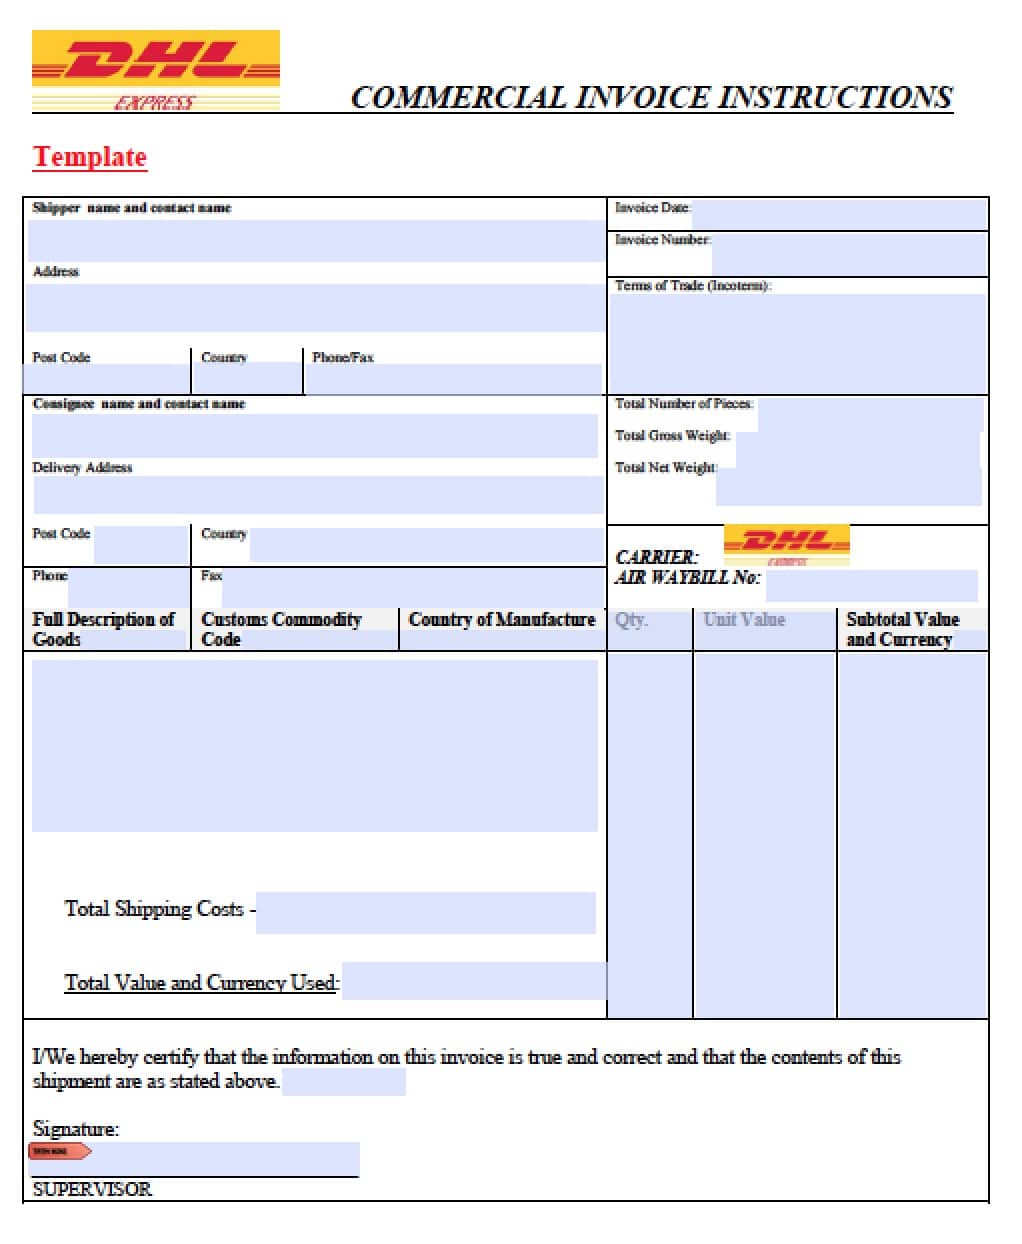 Dhl commercial invoice template excel - Search